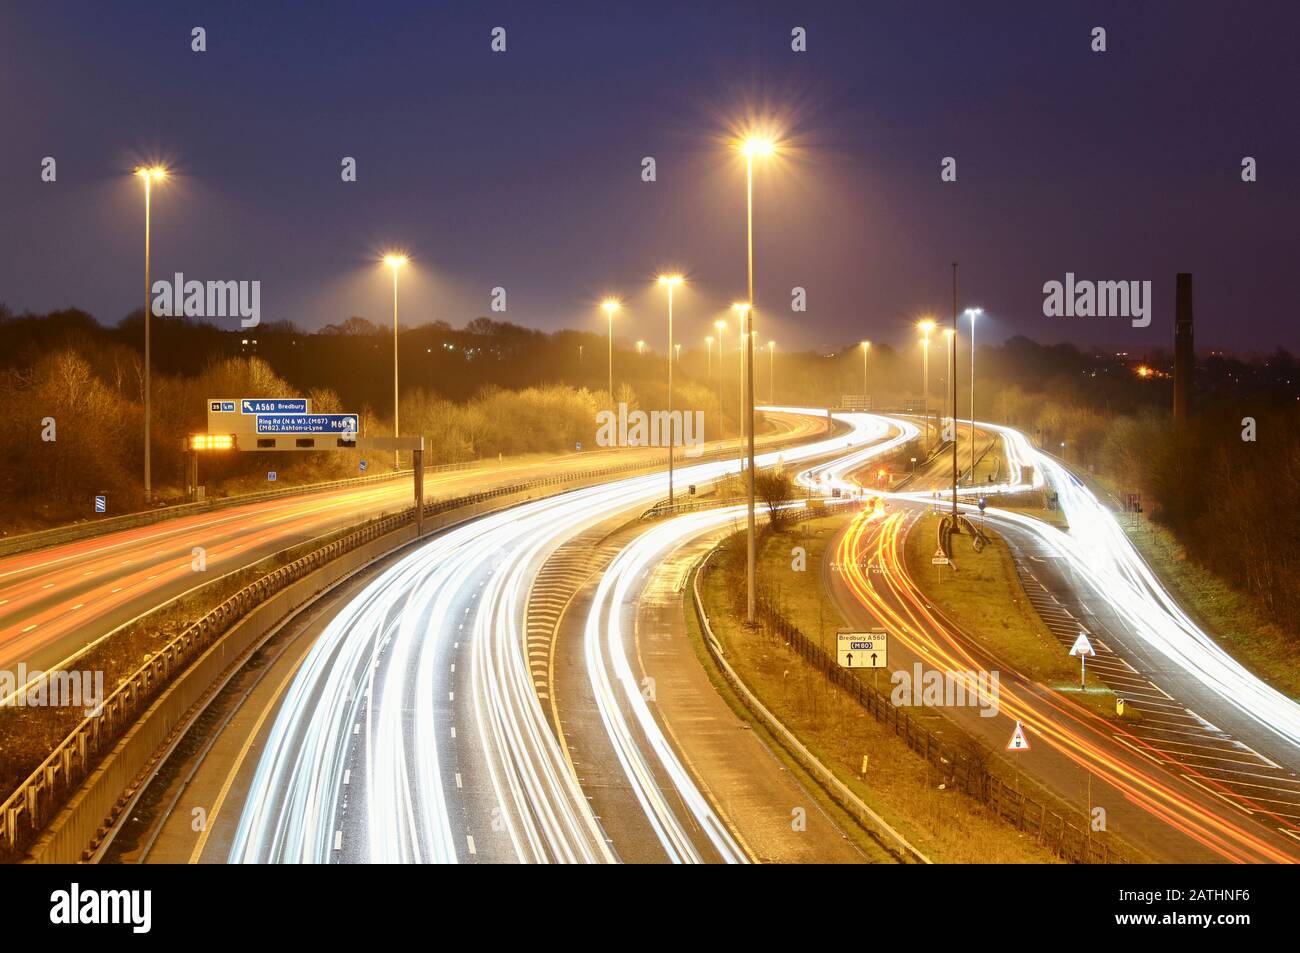 Junction 26 of the M60 ring road, also known as the 'Bredbury Scissors' at the evening rush hour with light trails from traffic. UK road, intersection Stock Photo